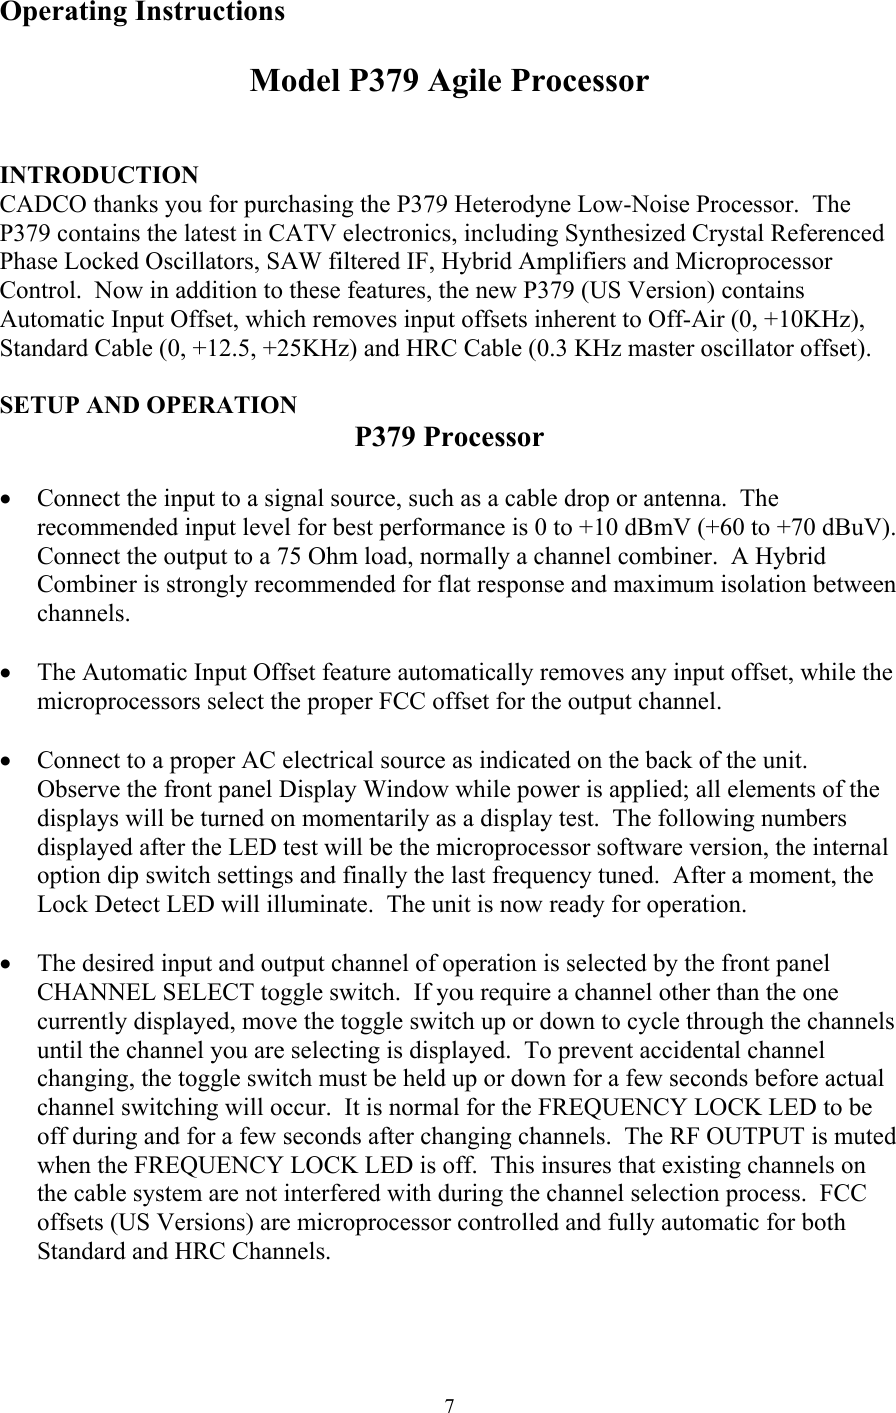 Operating Instructions  Model P379 Agile Processor   INTRODUCTION CADCO thanks you for purchasing the P379 Heterodyne Low-Noise Processor.  The P379 contains the latest in CATV electronics, including Synthesized Crystal Referenced Phase Locked Oscillators, SAW filtered IF, Hybrid Amplifiers and Microprocessor Control.  Now in addition to these features, the new P379 (US Version) contains Automatic Input Offset, which removes input offsets inherent to Off-Air (0, +10KHz), Standard Cable (0, +12.5, +25KHz) and HRC Cable (0.3 KHz master oscillator offset).  SETUP AND OPERATION P379 Processor  •  Connect the input to a signal source, such as a cable drop or antenna.  The recommended input level for best performance is 0 to +10 dBmV (+60 to +70 dBuV).  Connect the output to a 75 Ohm load, normally a channel combiner.  A Hybrid Combiner is strongly recommended for flat response and maximum isolation between channels.  •  The Automatic Input Offset feature automatically removes any input offset, while the microprocessors select the proper FCC offset for the output channel.  •  Connect to a proper AC electrical source as indicated on the back of the unit.  Observe the front panel Display Window while power is applied; all elements of the displays will be turned on momentarily as a display test.  The following numbers displayed after the LED test will be the microprocessor software version, the internal option dip switch settings and finally the last frequency tuned.  After a moment, the Lock Detect LED will illuminate.  The unit is now ready for operation.  •  The desired input and output channel of operation is selected by the front panel CHANNEL SELECT toggle switch.  If you require a channel other than the one currently displayed, move the toggle switch up or down to cycle through the channels until the channel you are selecting is displayed.  To prevent accidental channel changing, the toggle switch must be held up or down for a few seconds before actual channel switching will occur.  It is normal for the FREQUENCY LOCK LED to be off during and for a few seconds after changing channels.  The RF OUTPUT is muted when the FREQUENCY LOCK LED is off.  This insures that existing channels on the cable system are not interfered with during the channel selection process.  FCC offsets (US Versions) are microprocessor controlled and fully automatic for both Standard and HRC Channels.   7